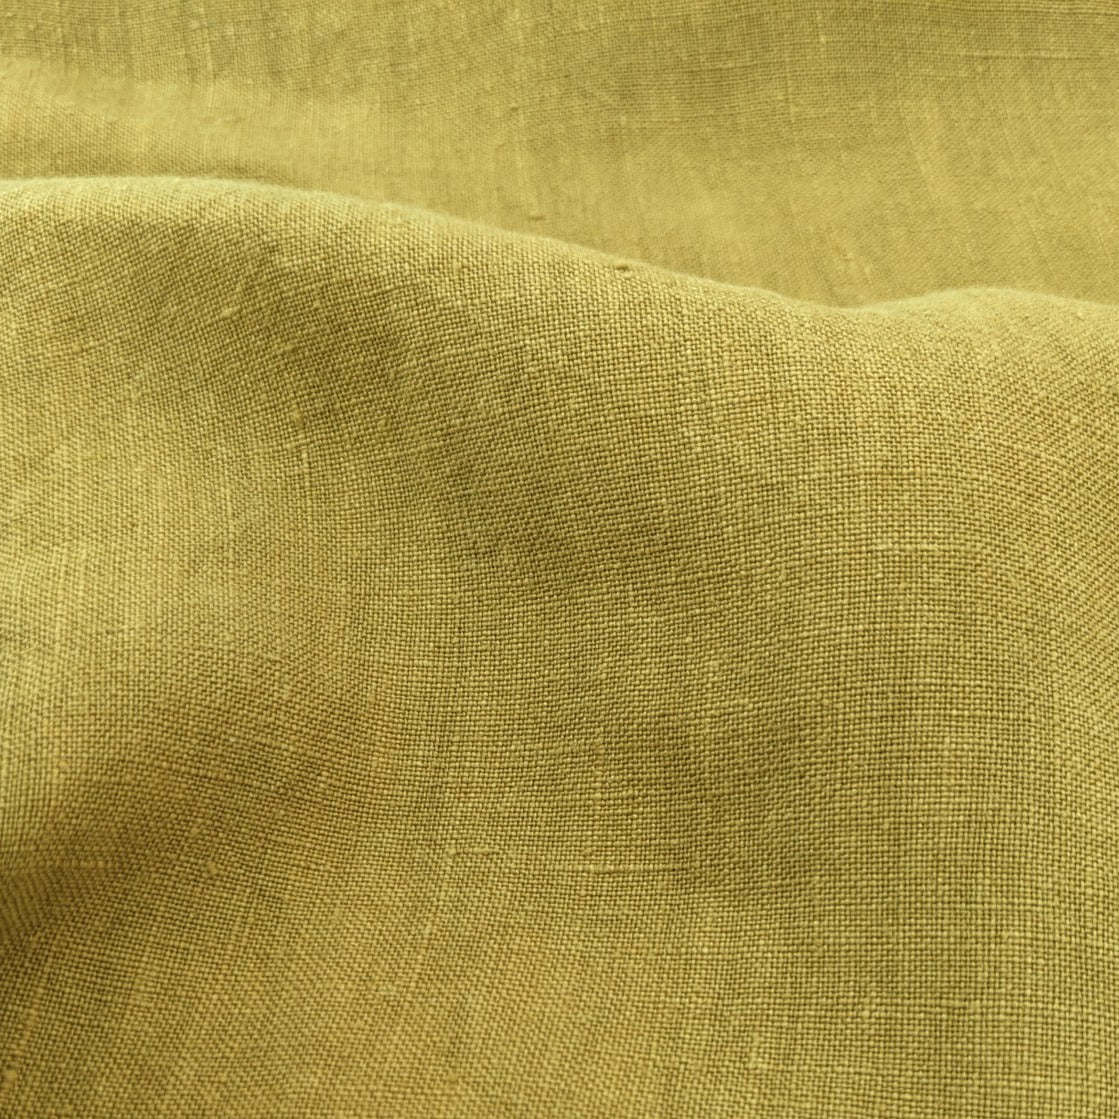 Remnant: Washed Linen - Avocado (1.15 metres)